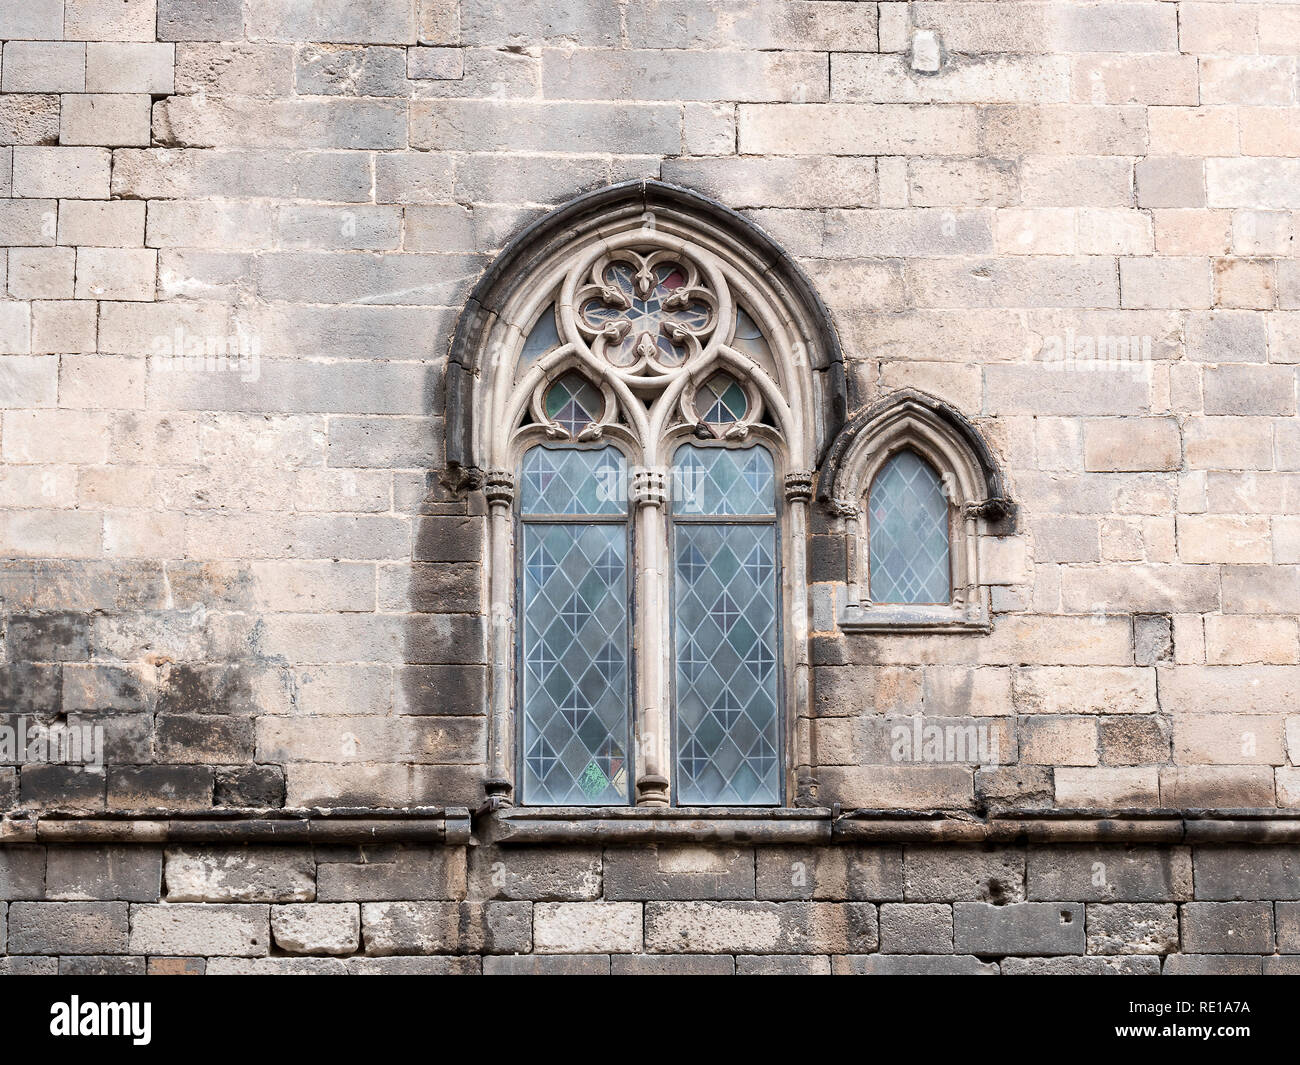 Traditional ancient gothic style window. Old vintage window on stone wall. Stock Photo